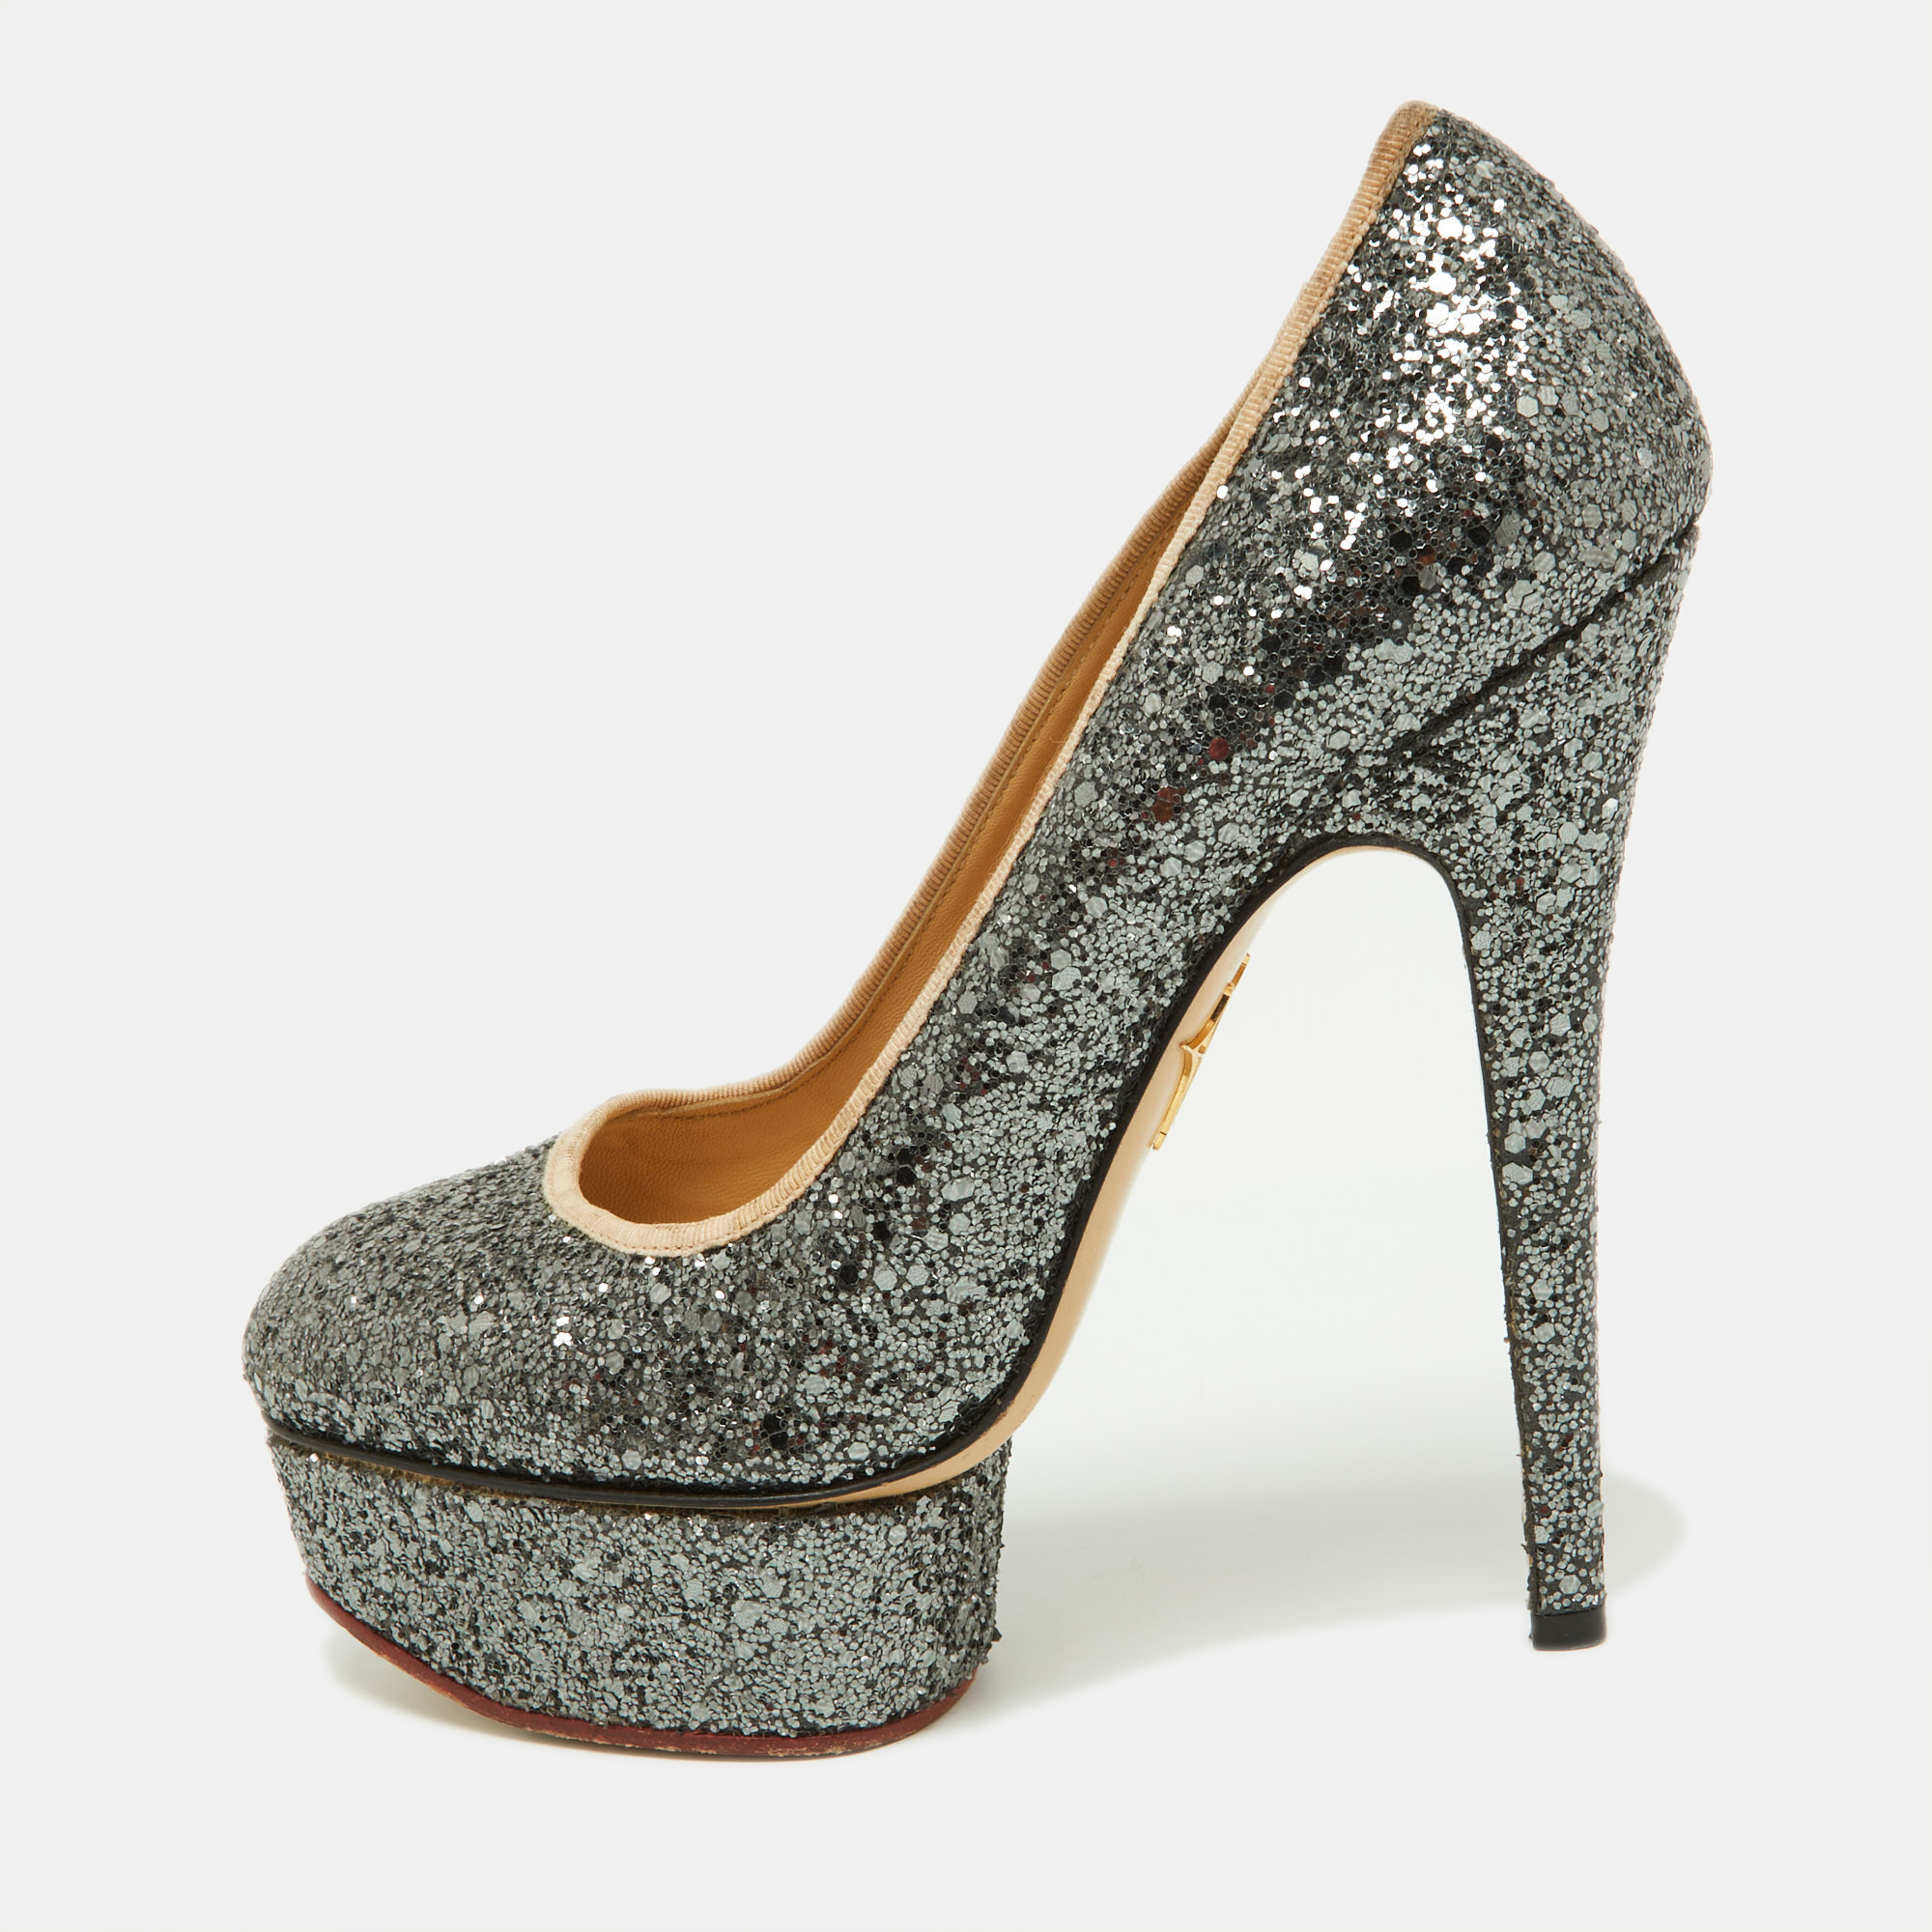 Pre-owned Charlotte Olympia Metallic Grey Coarse Glitter Dolly Pumps Size 37